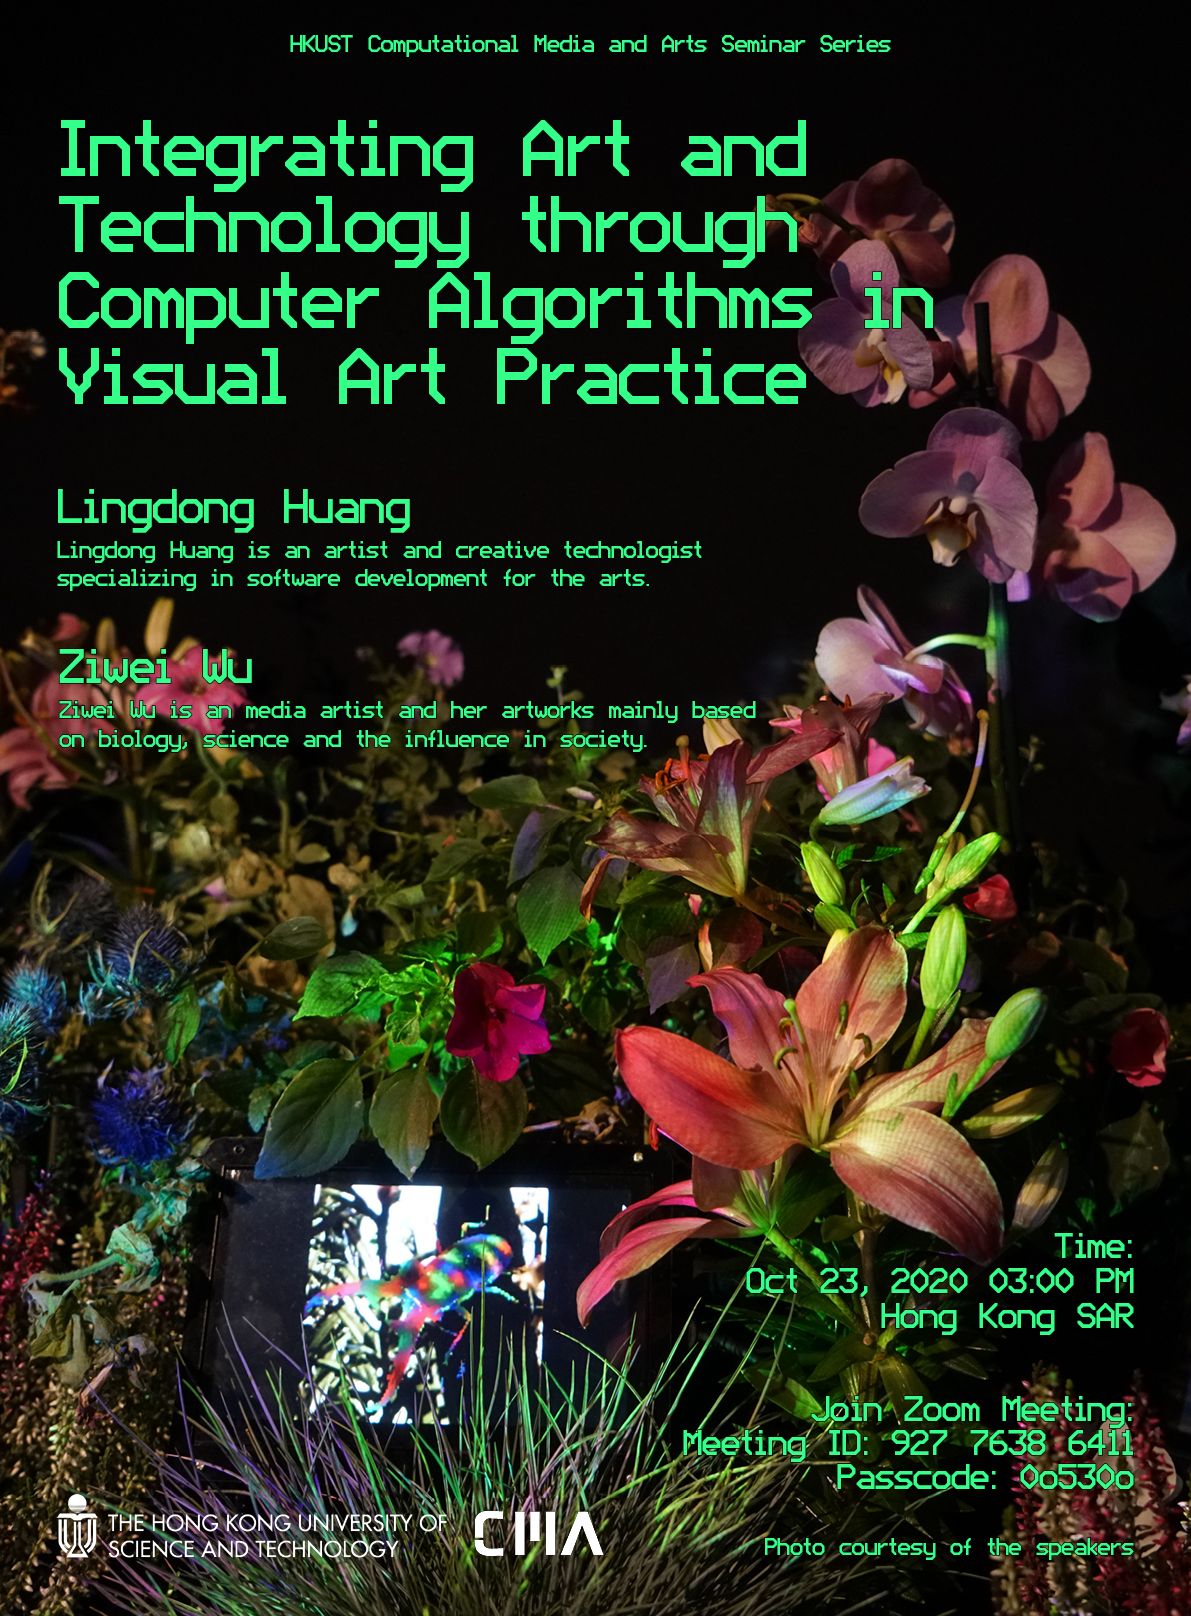 Integrating Art and Technology through Computer Algorithms in Visual Art Practice